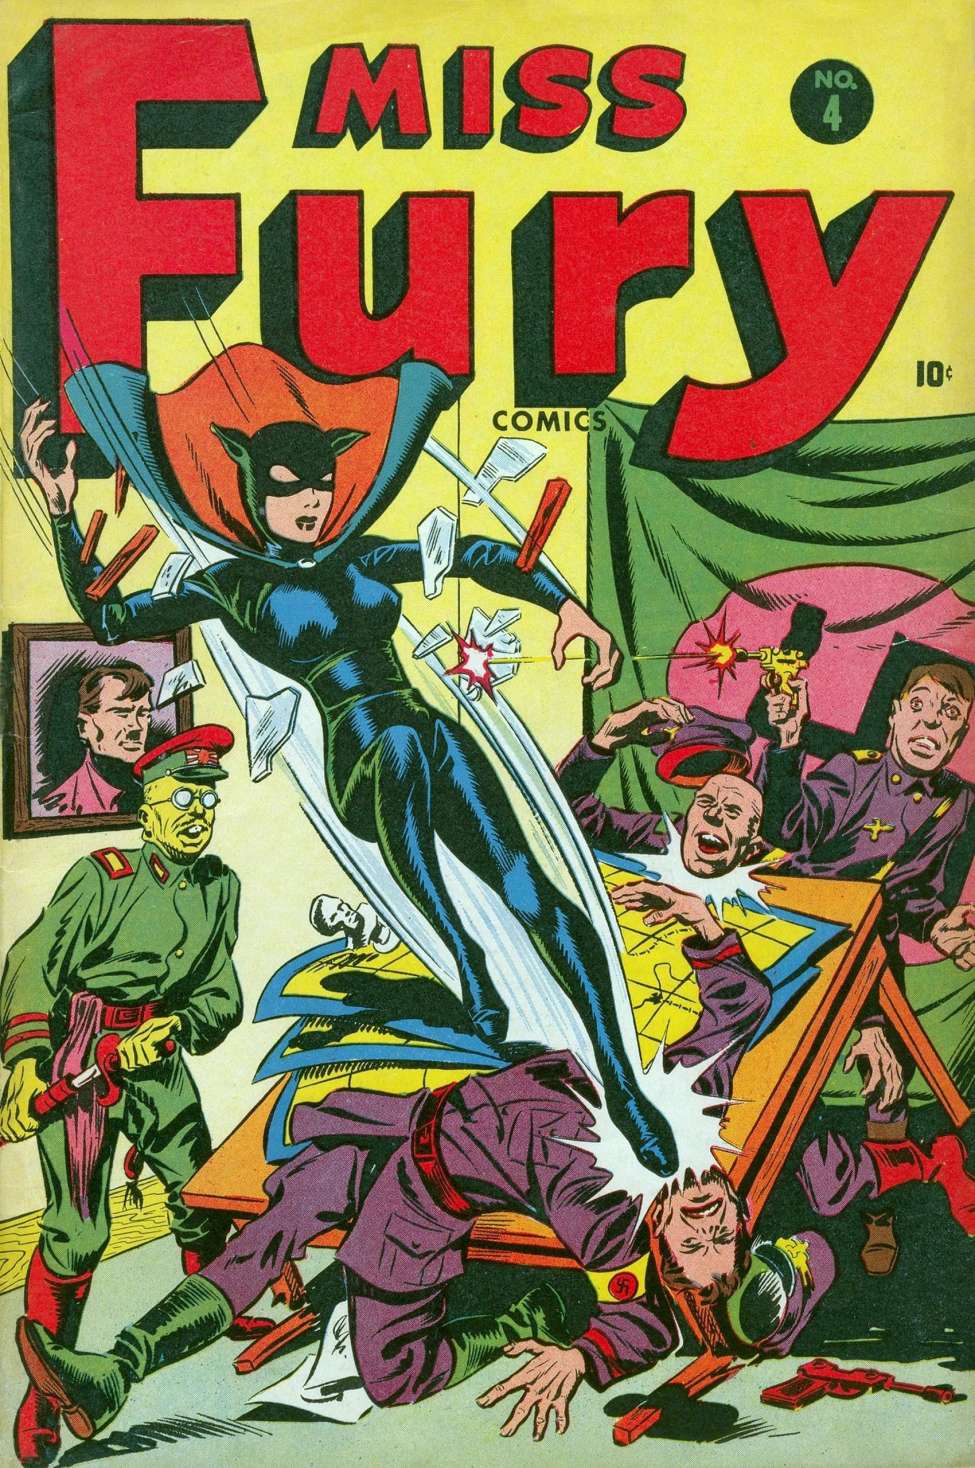 Book Cover For Miss Fury 4